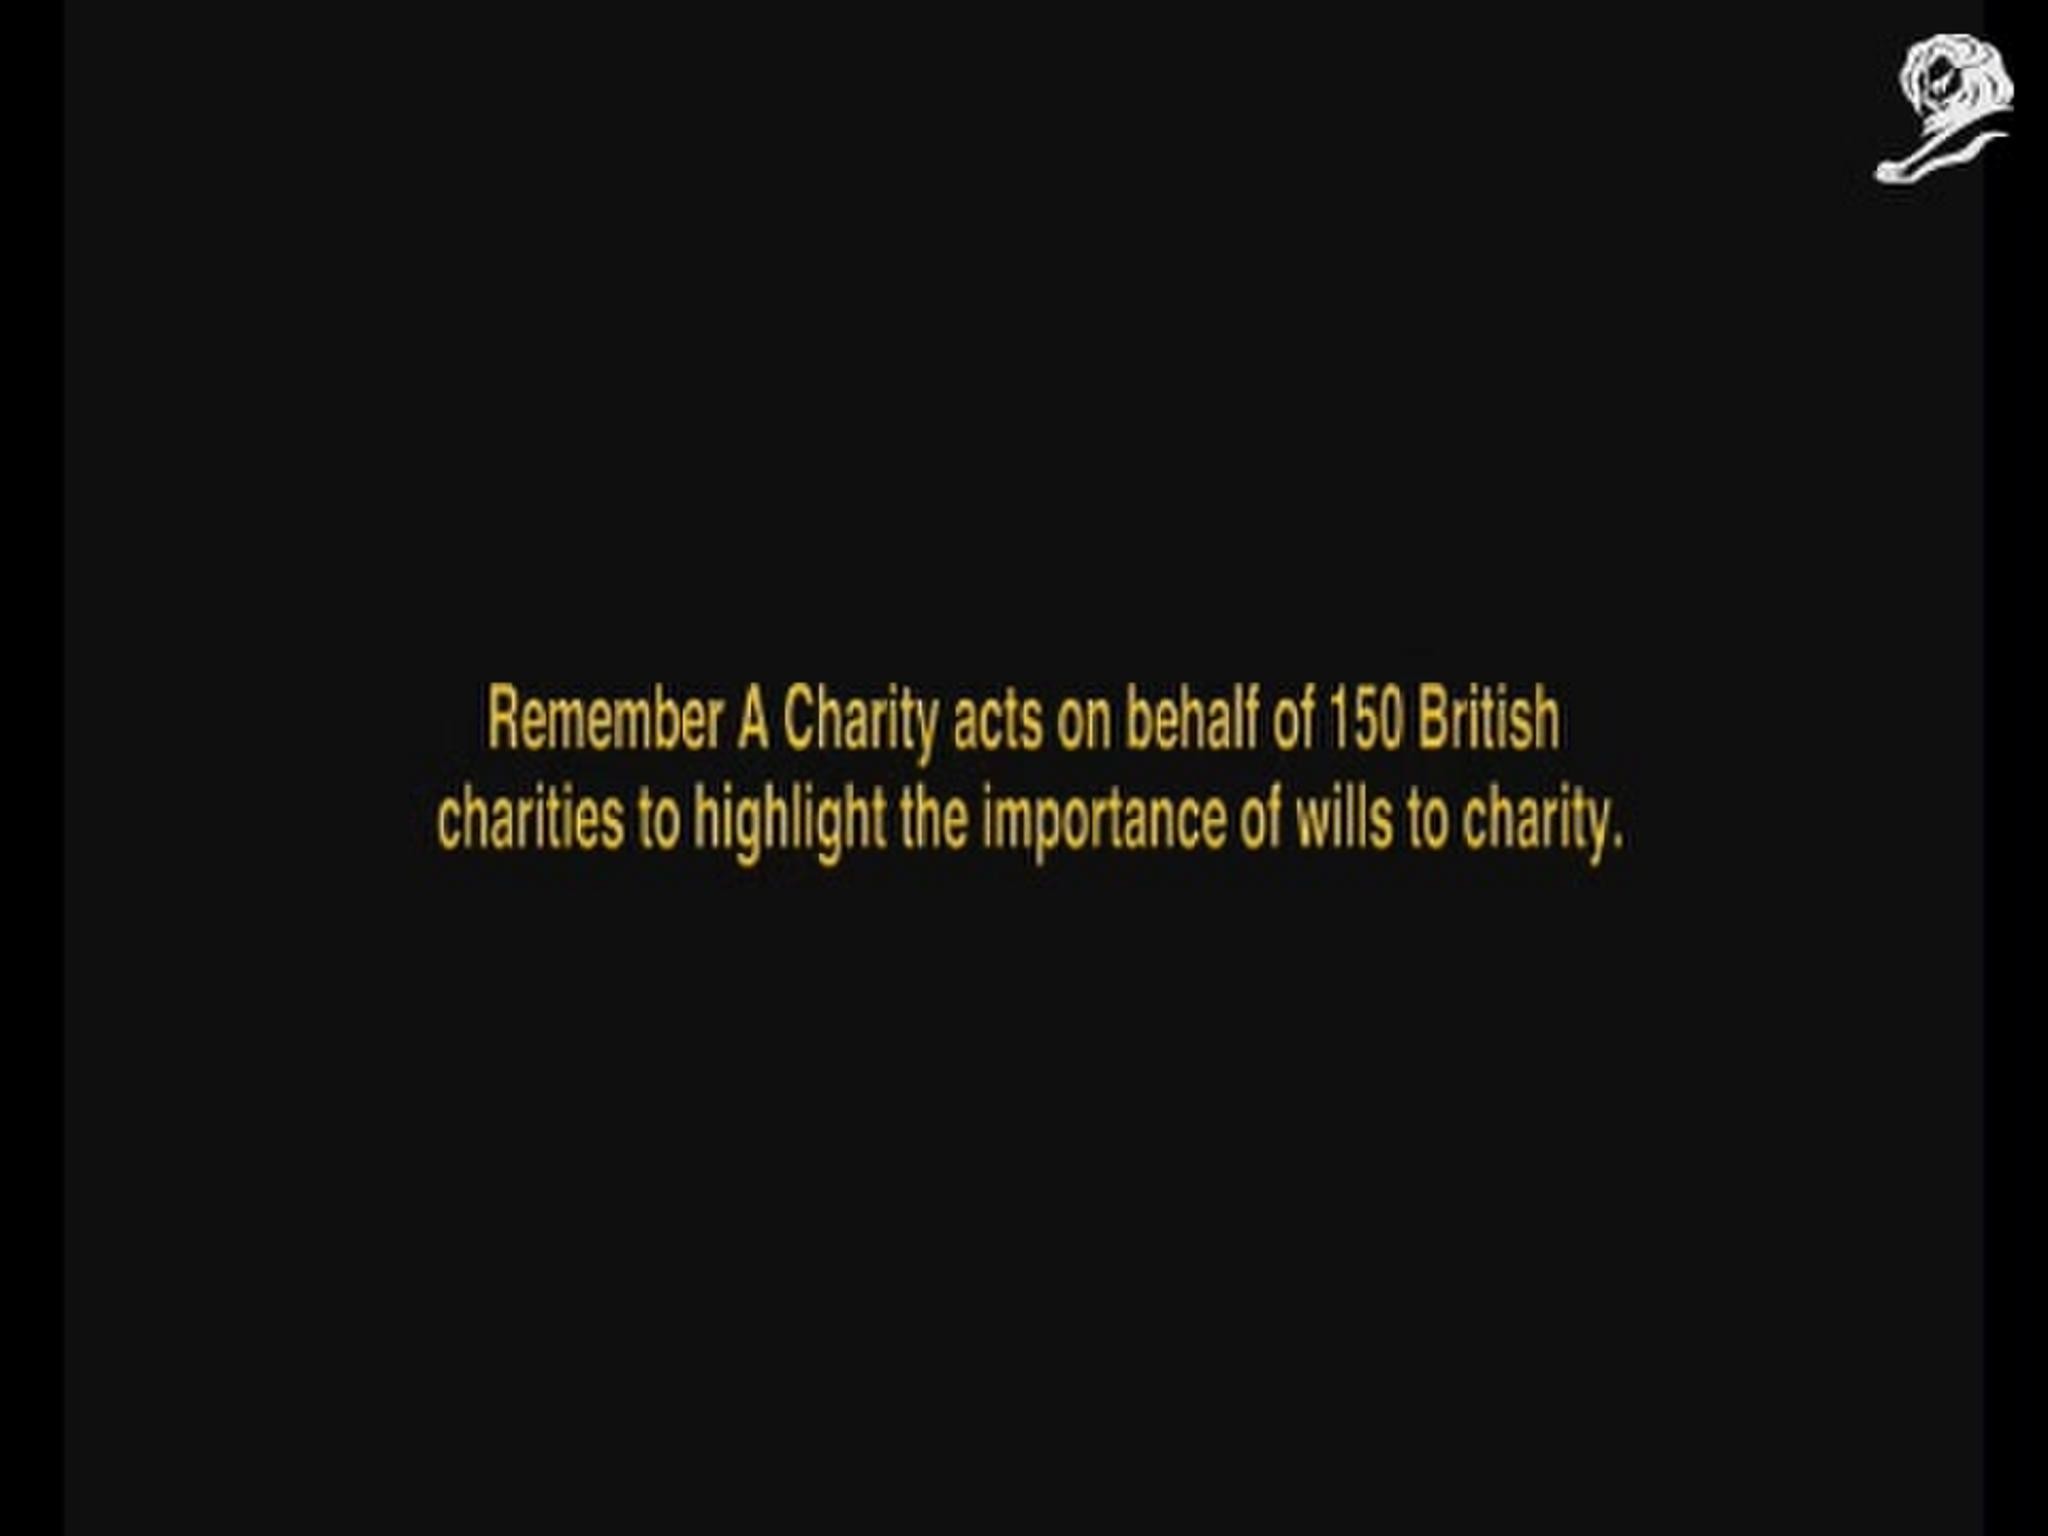 REMEMBER A CHARITY